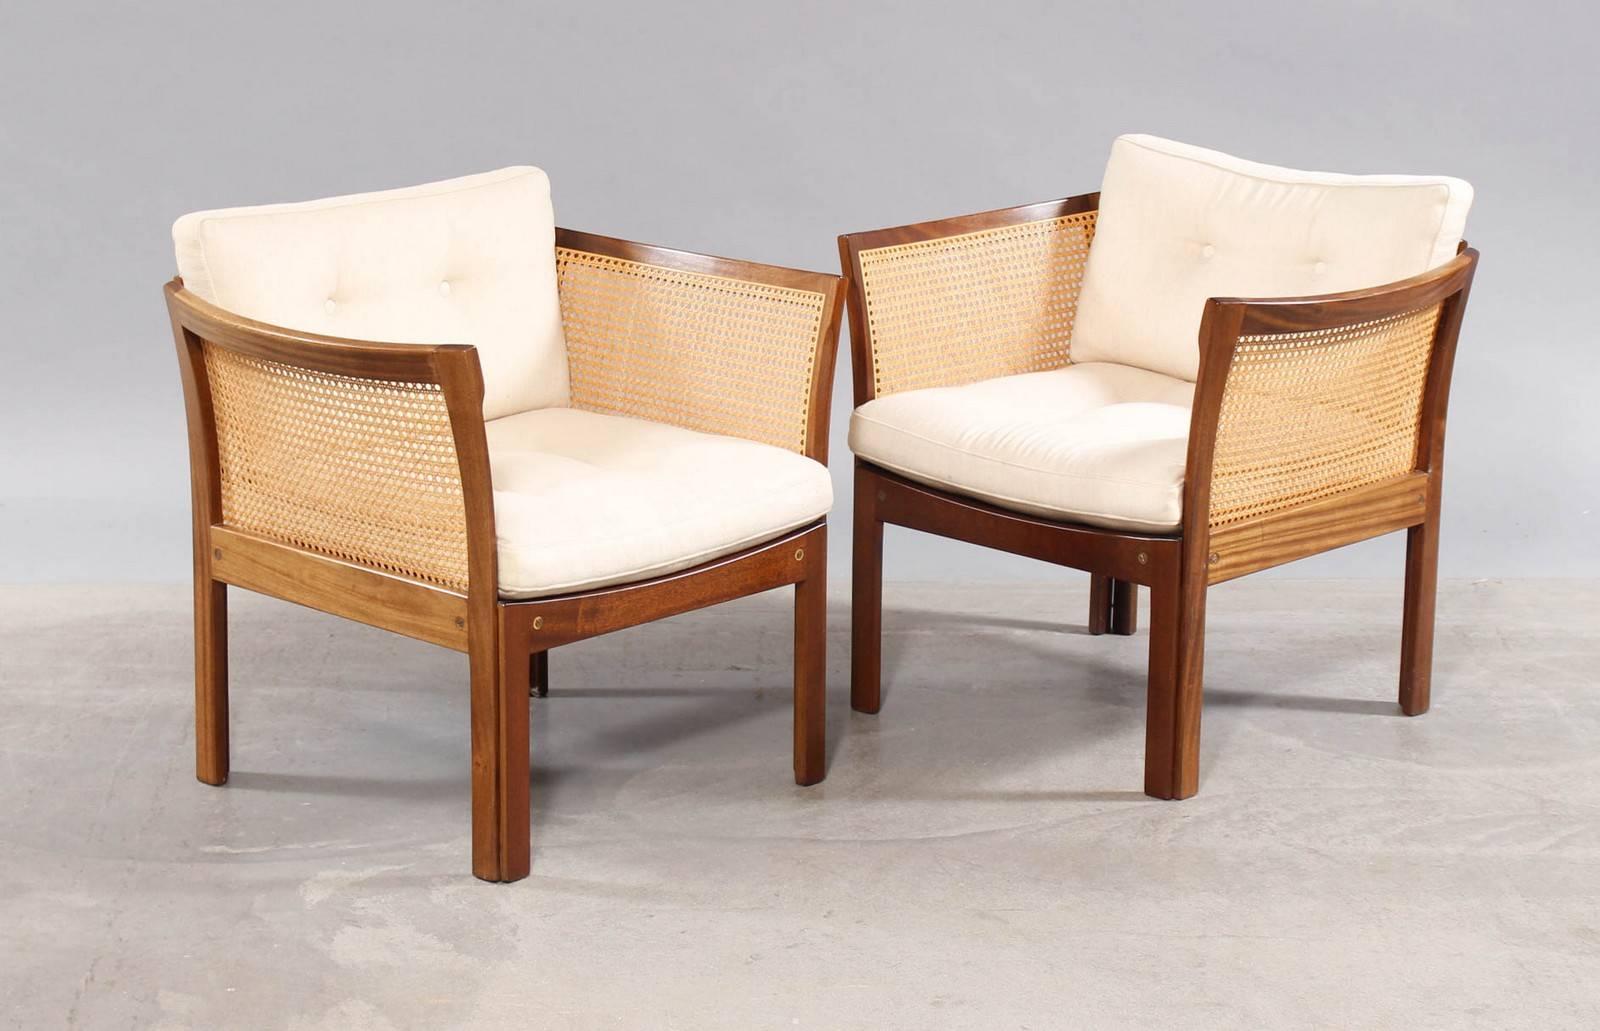 The Plexus armchair series was designed by Illum Wikkelsø in the 1960s and produced by CFC Silkeborg. This set features

The armchairs are in good condition and features a frame in mahogany and fabric upholstery.

The Plexus series is designed to be